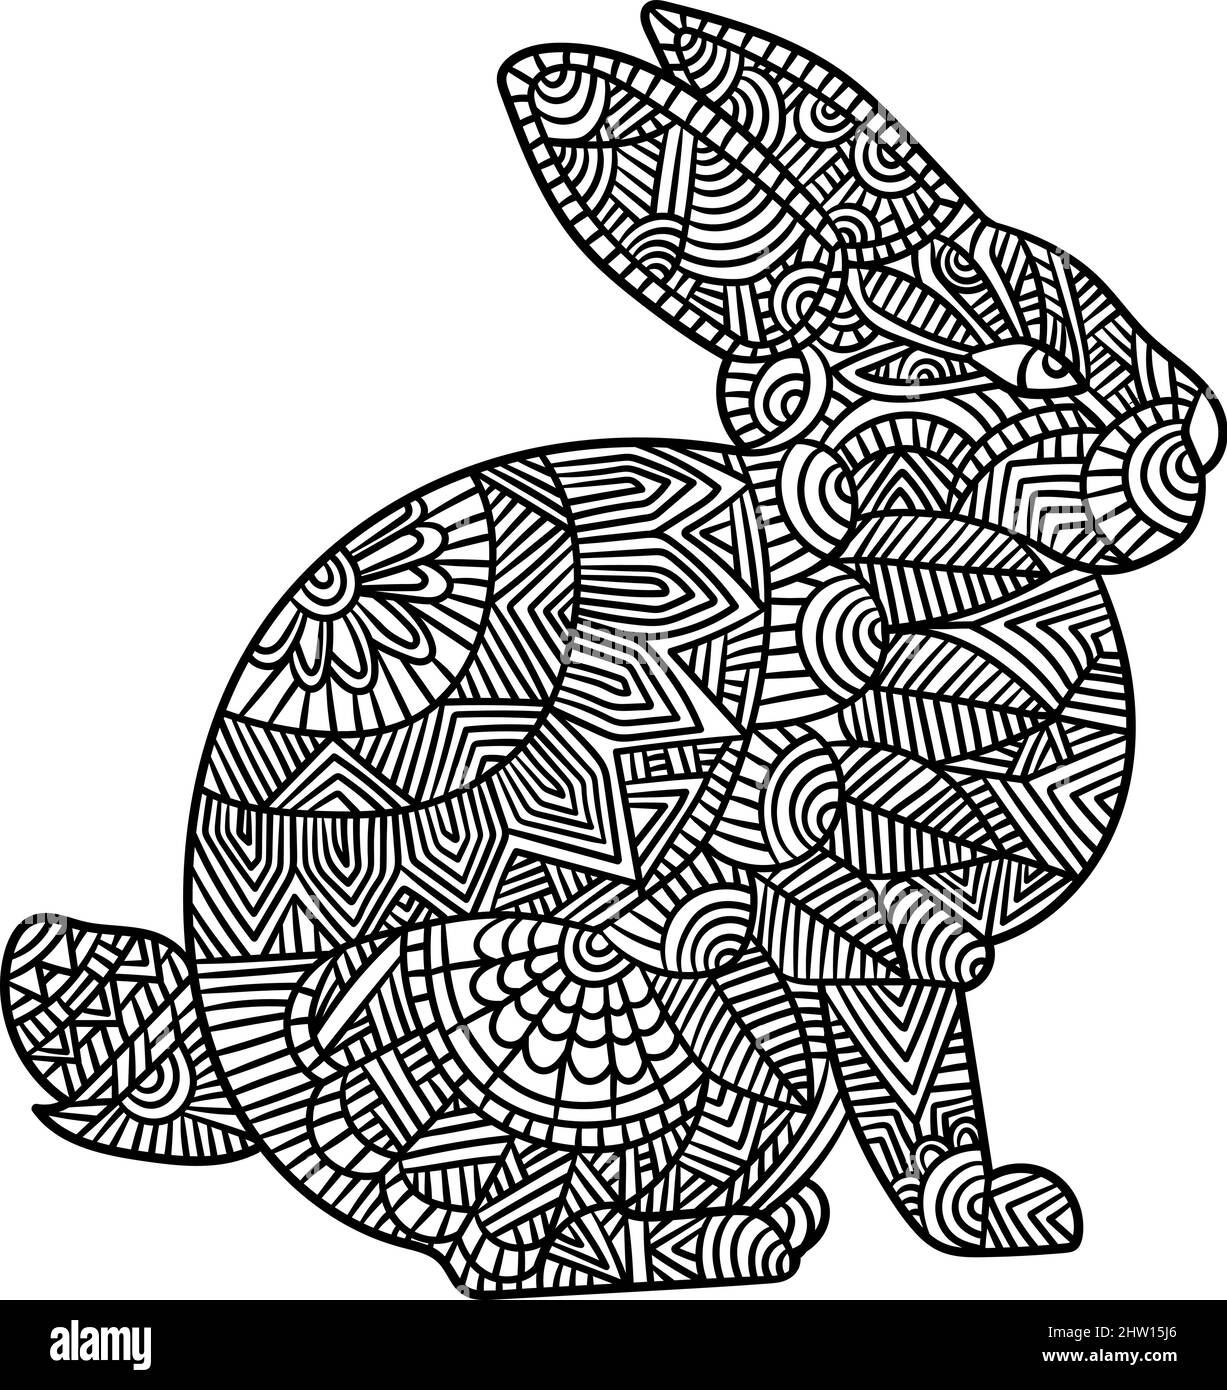 Rabbit Mandala Coloring Pages for Adults Stock Vector